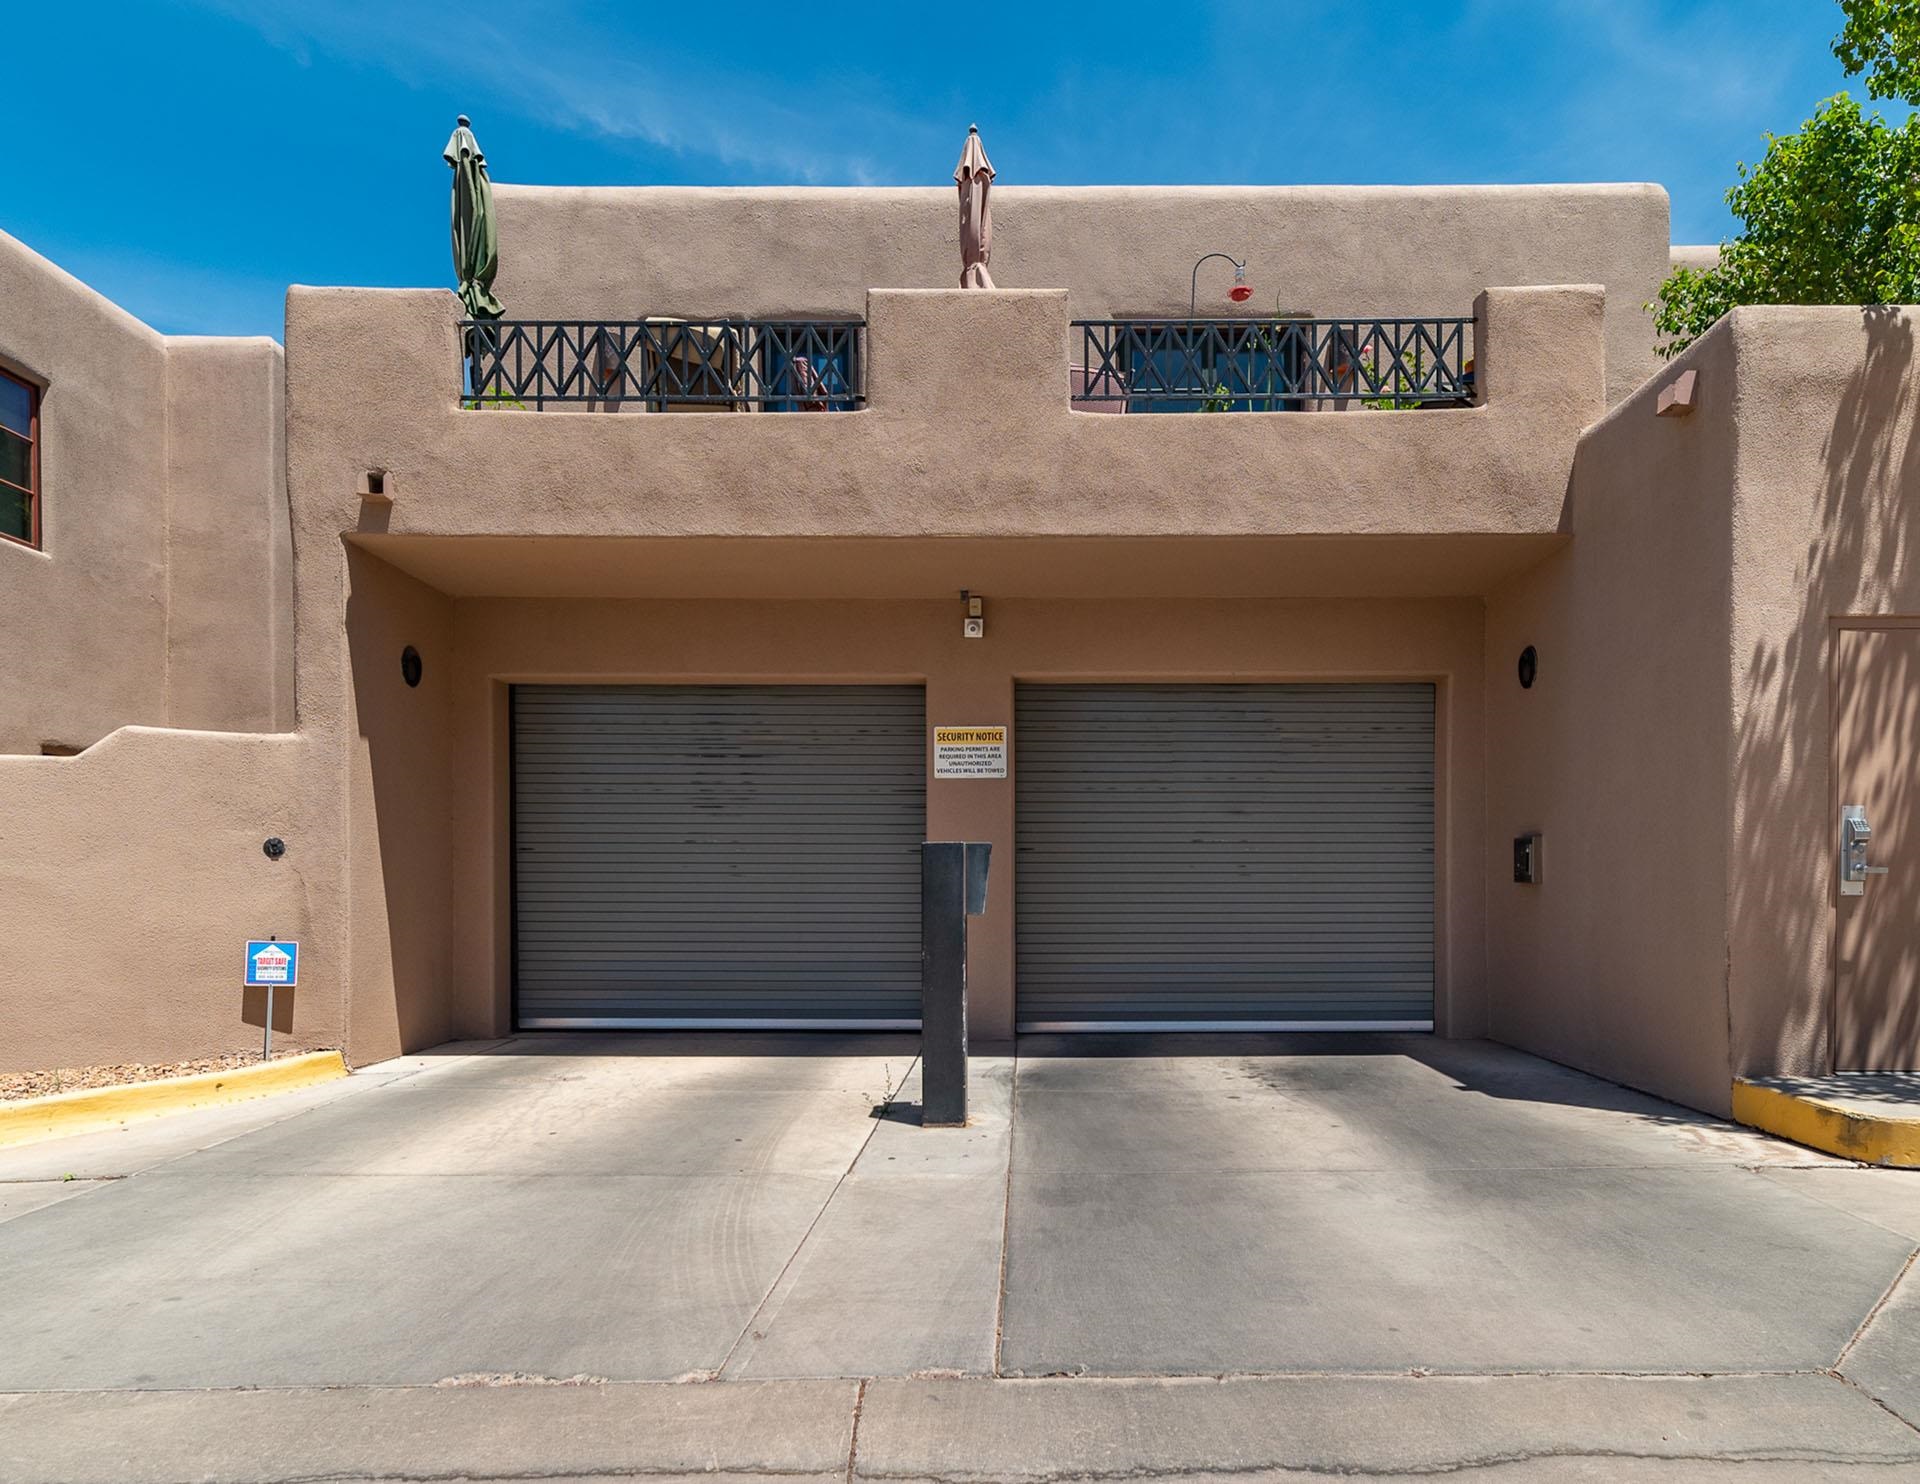 103 CATRON #6, Santa Fe, New Mexico 87501, 1 Bedroom Bedrooms, ,1 BathroomBathrooms,Residential,For Sale,103 CATRON #6,202202043